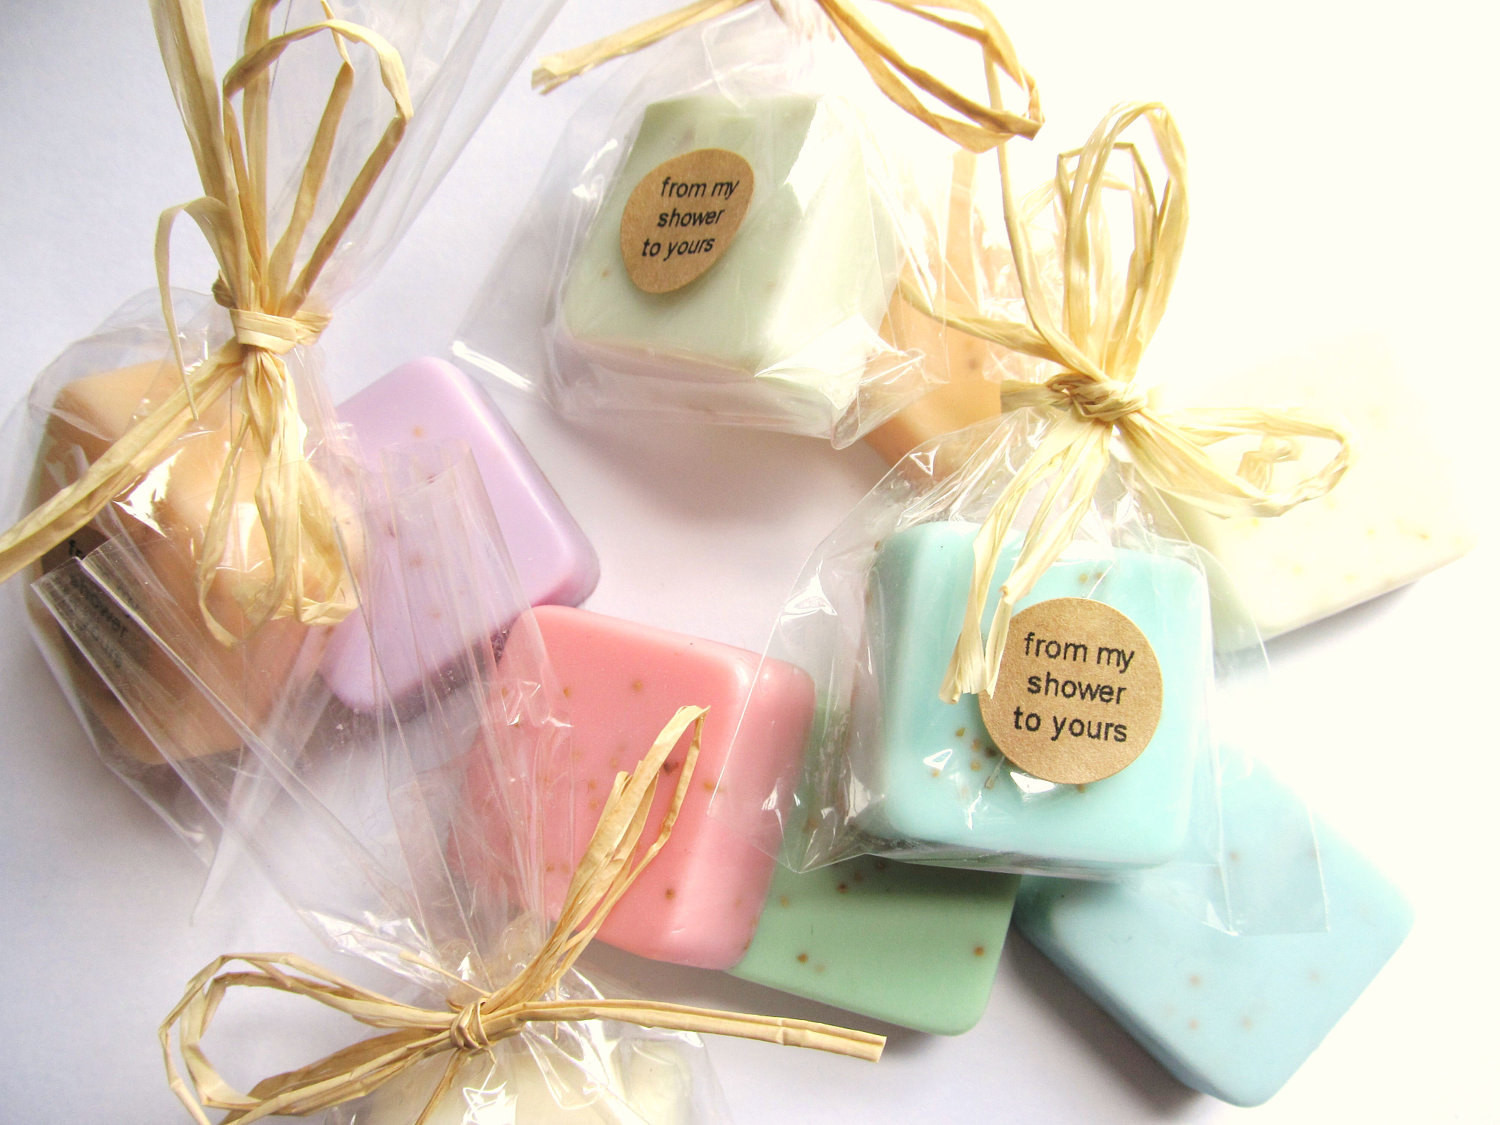 Wedding Party Favors
 50 Wedding Favors soap favors Party Favors by kitschandfancy